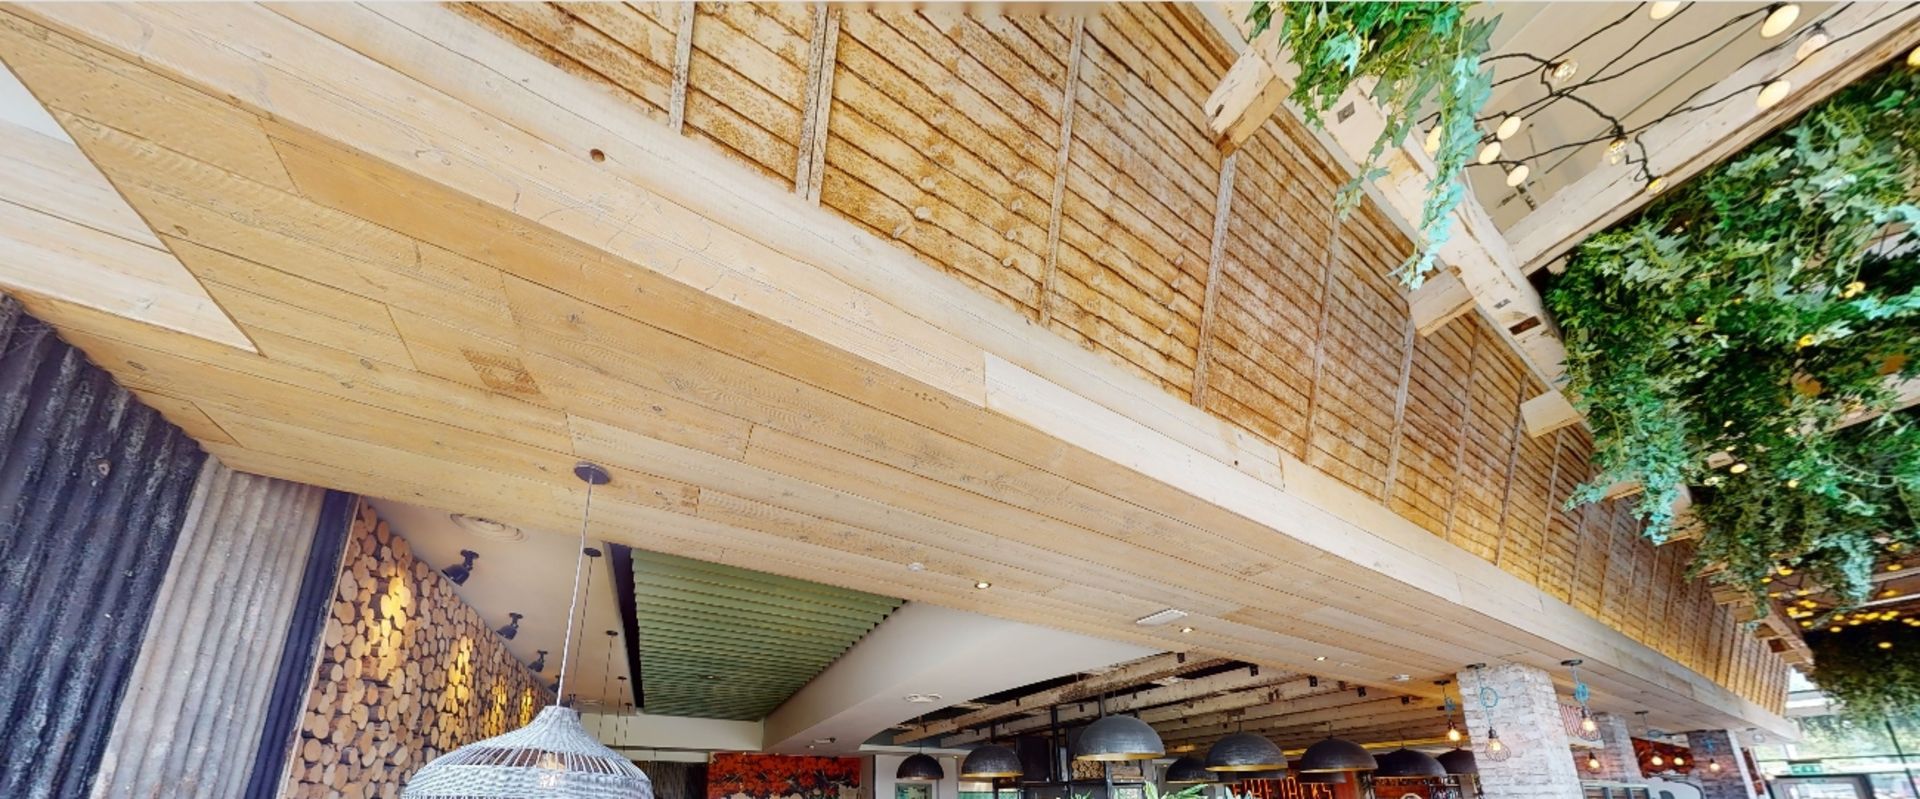 1 x Large Quantity of Natural Oak Wooden Wall Panelling - Various Sized Lengths - Image 10 of 14